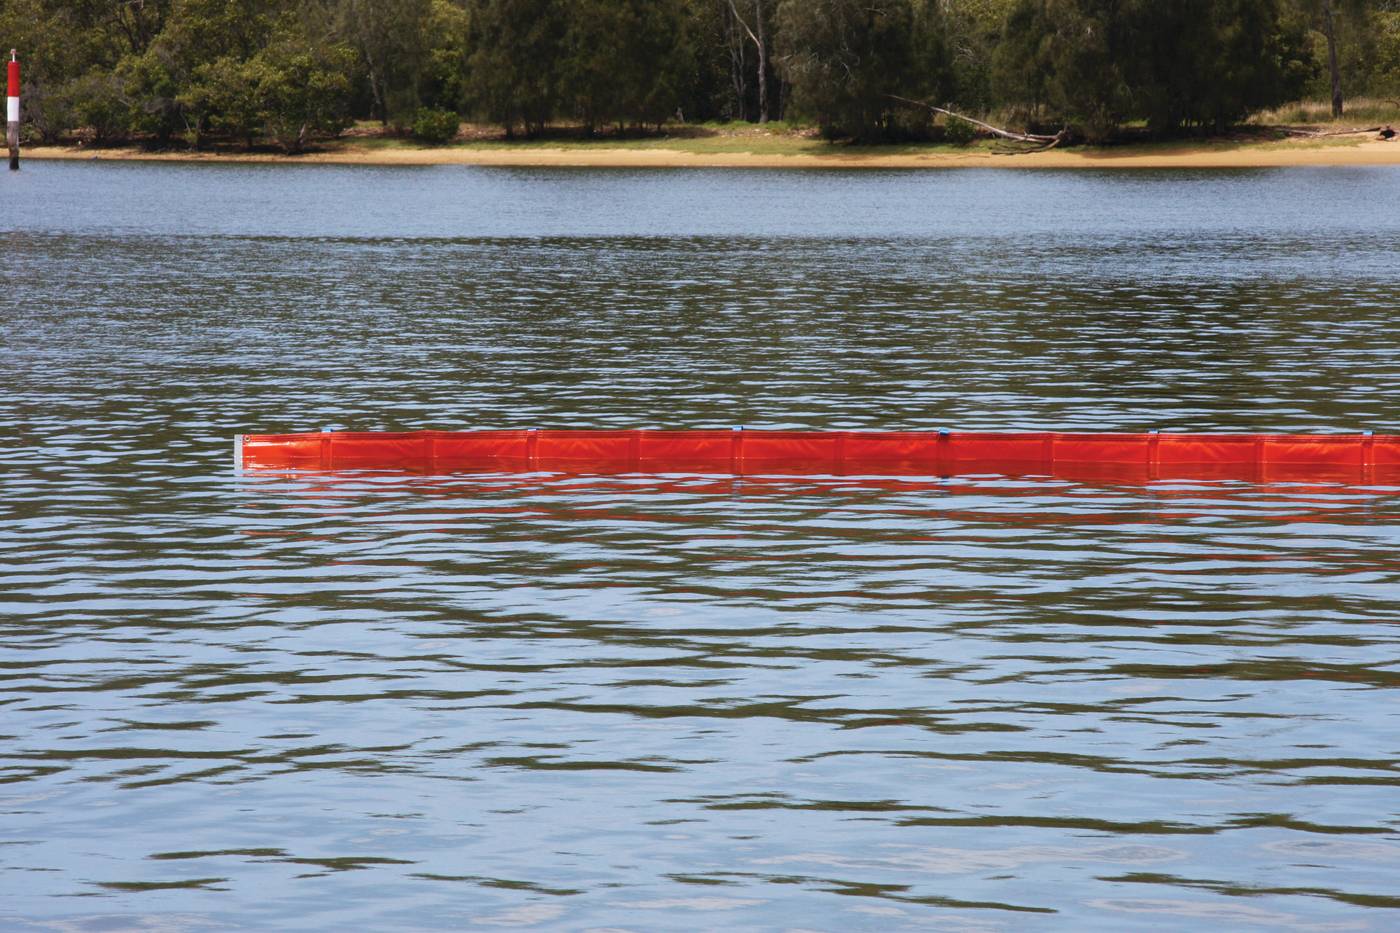 Chatoyer Fence Boom deployed in waterway